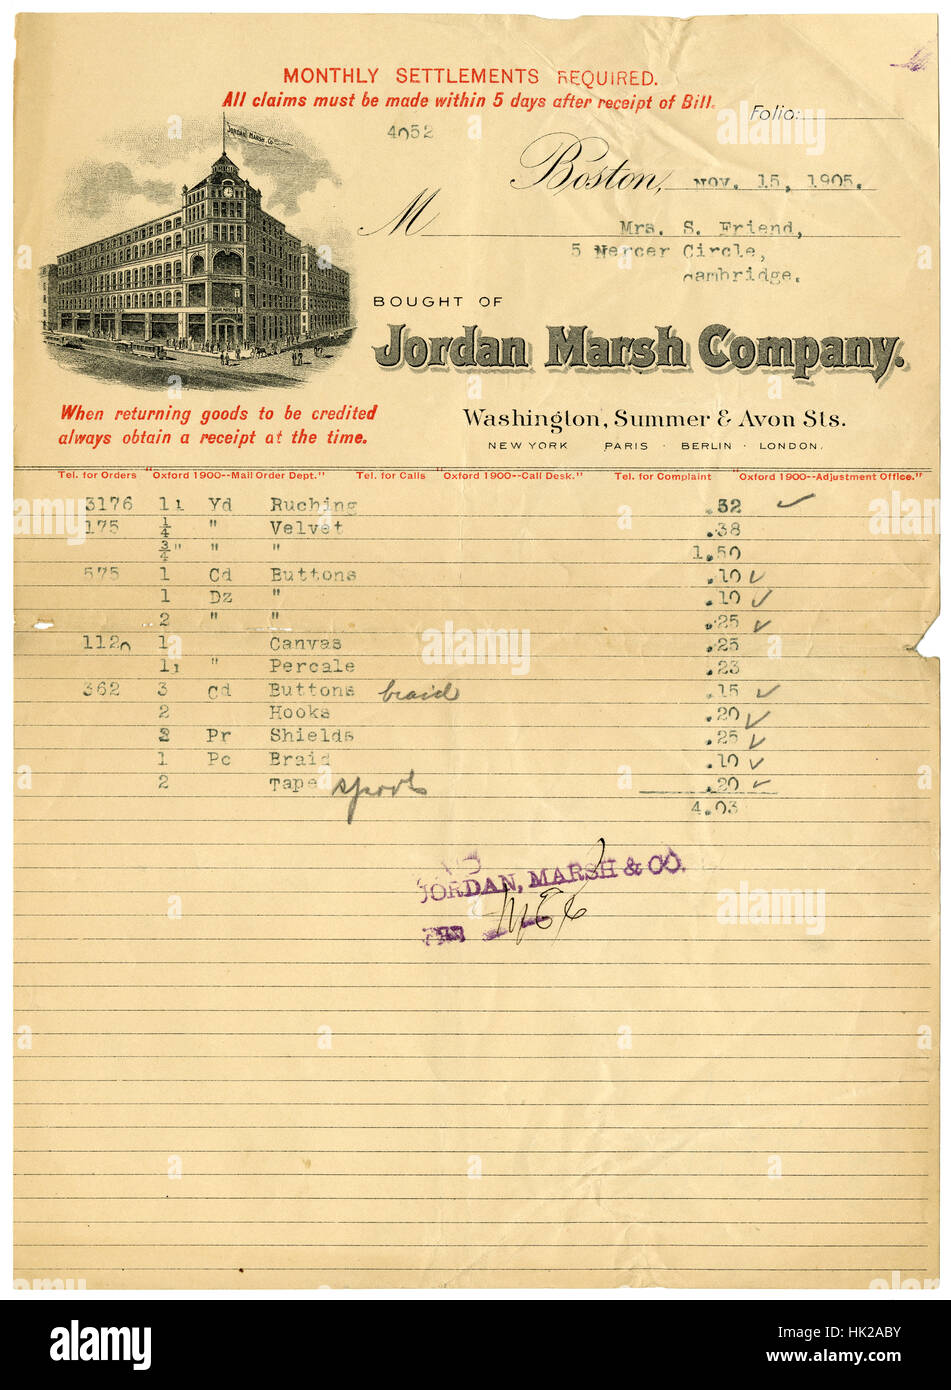 Antique 1905 billhead from the Jordan Marsh Company in Boston, Massachusetts. The Monthly Settlements invoice includes sewing supplies like ruching, velvet, buttons, canvas, percale, hooks and shields. Stock Photo